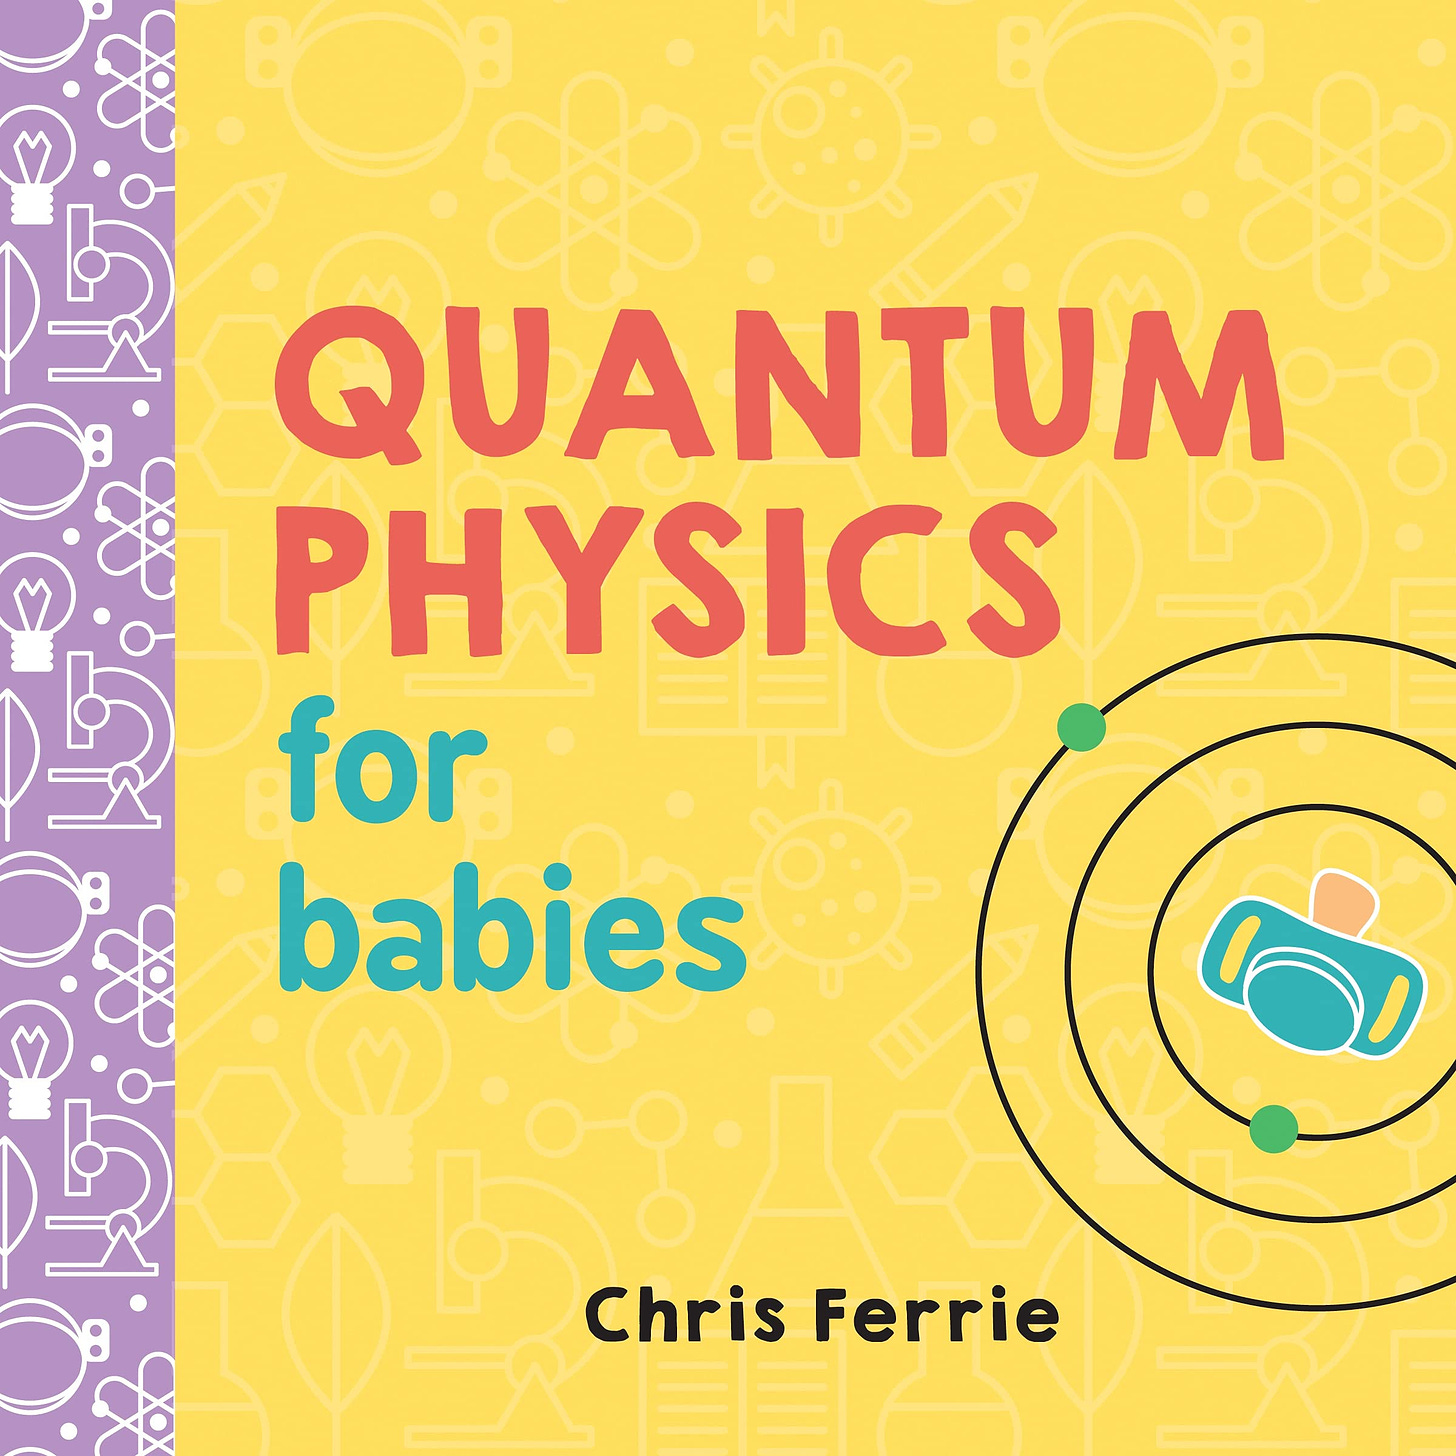 Buy Quantum Physics for Babies: 0 (Baby University) Book Online at Low  Prices in India | Quantum Physics for Babies: 0 (Baby University) Reviews &  Ratings - Amazon.in